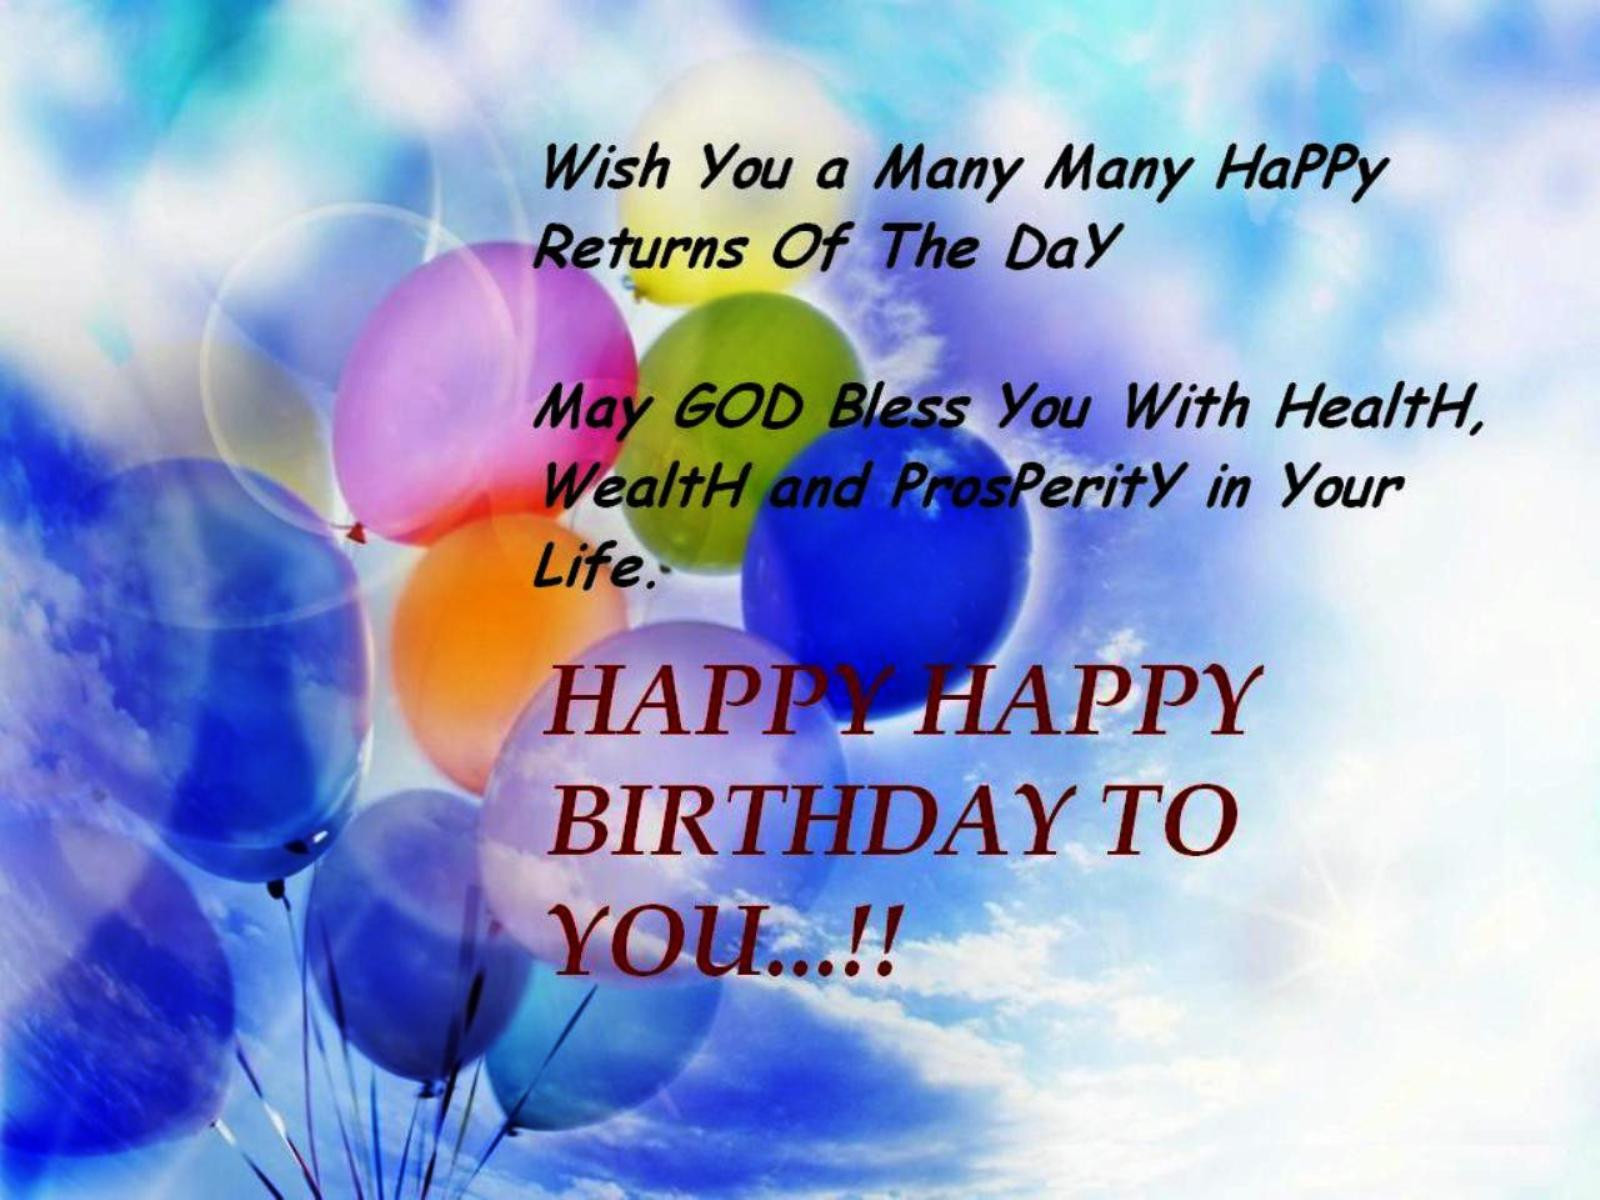 Wishing You A Happy Birthday Quotes
 Best Happy Birthday Wishes Quotes for 2018 Bday Messages